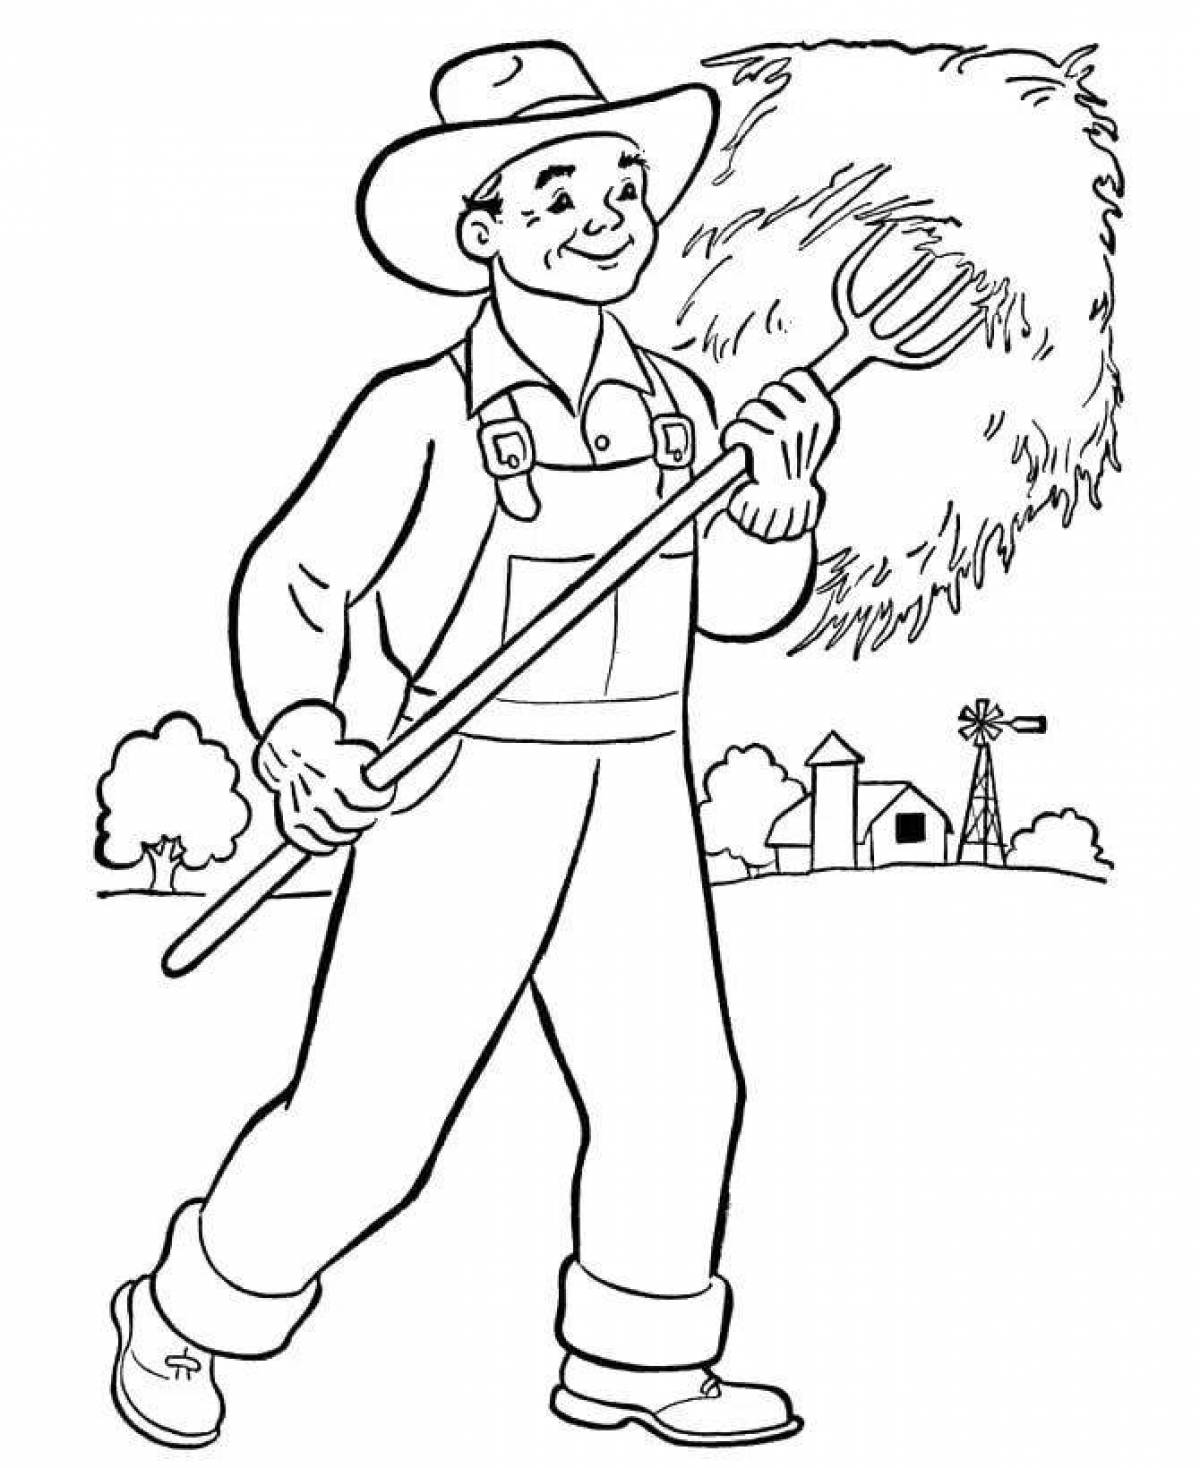 Dazzling coloring book about farming in winter